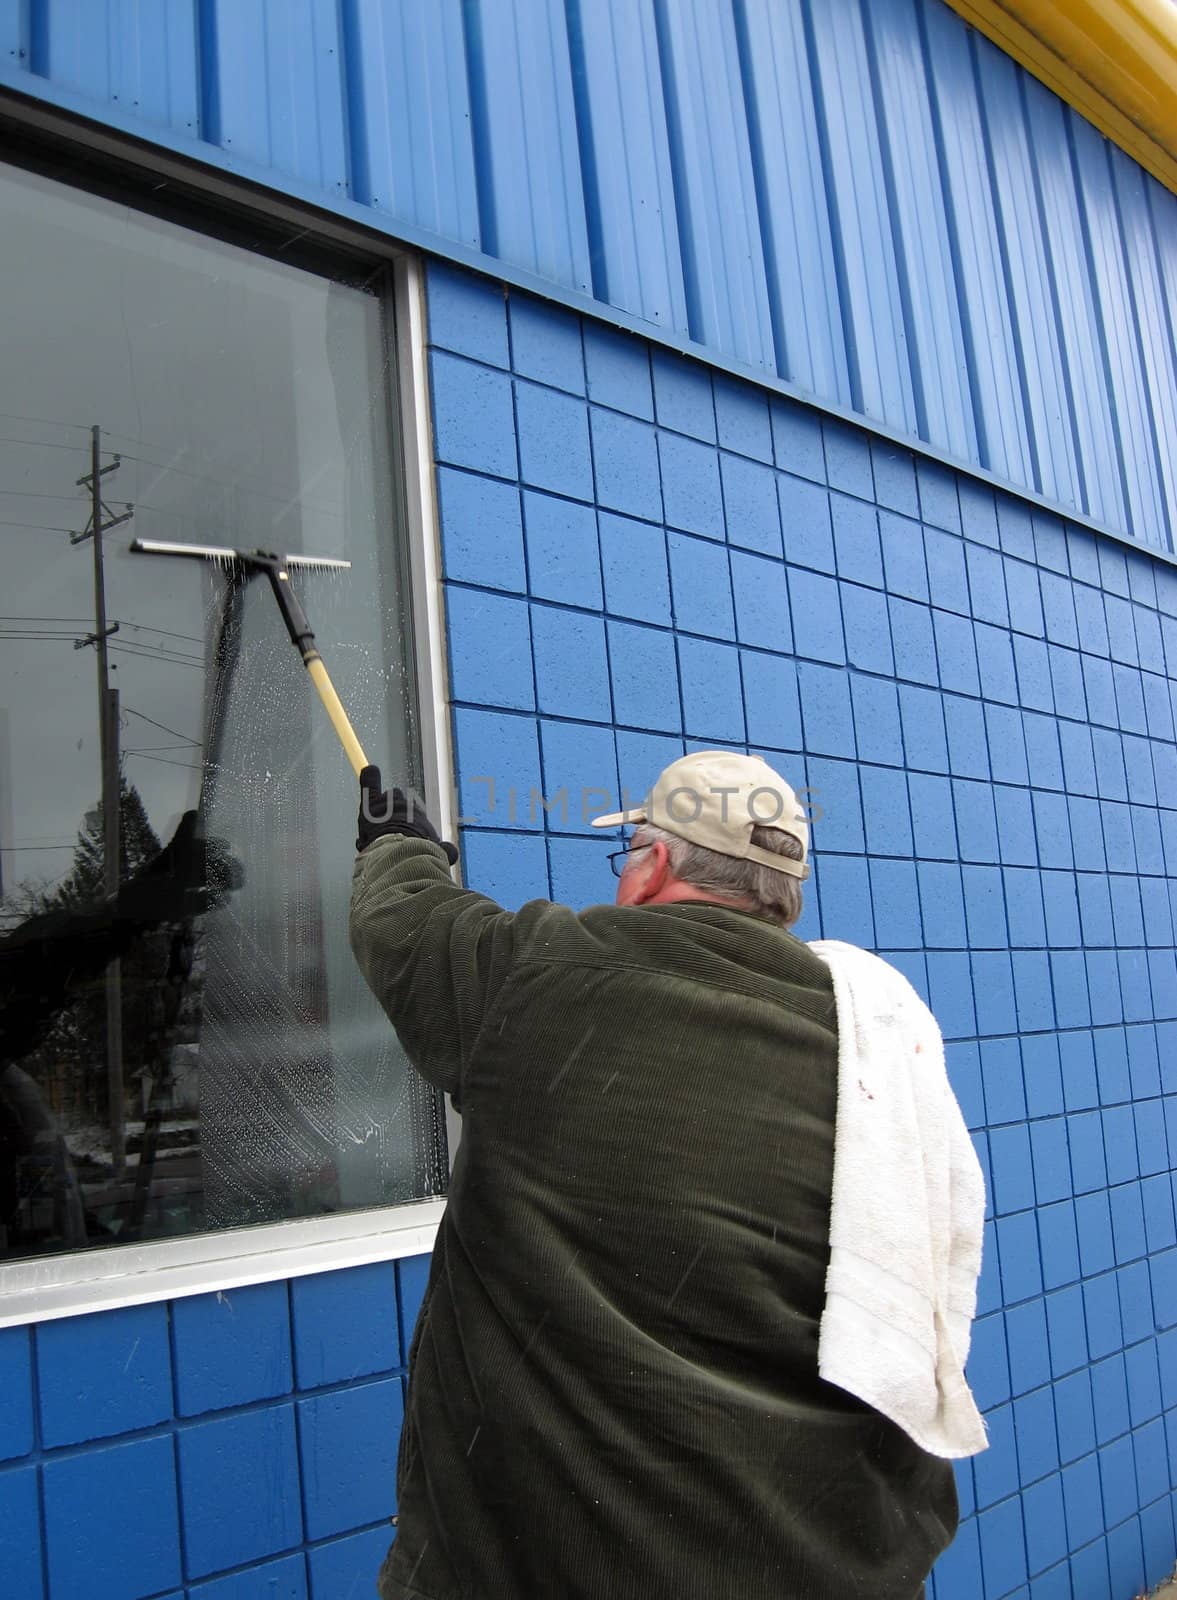 professional commercial window washer cleaning windows at a business